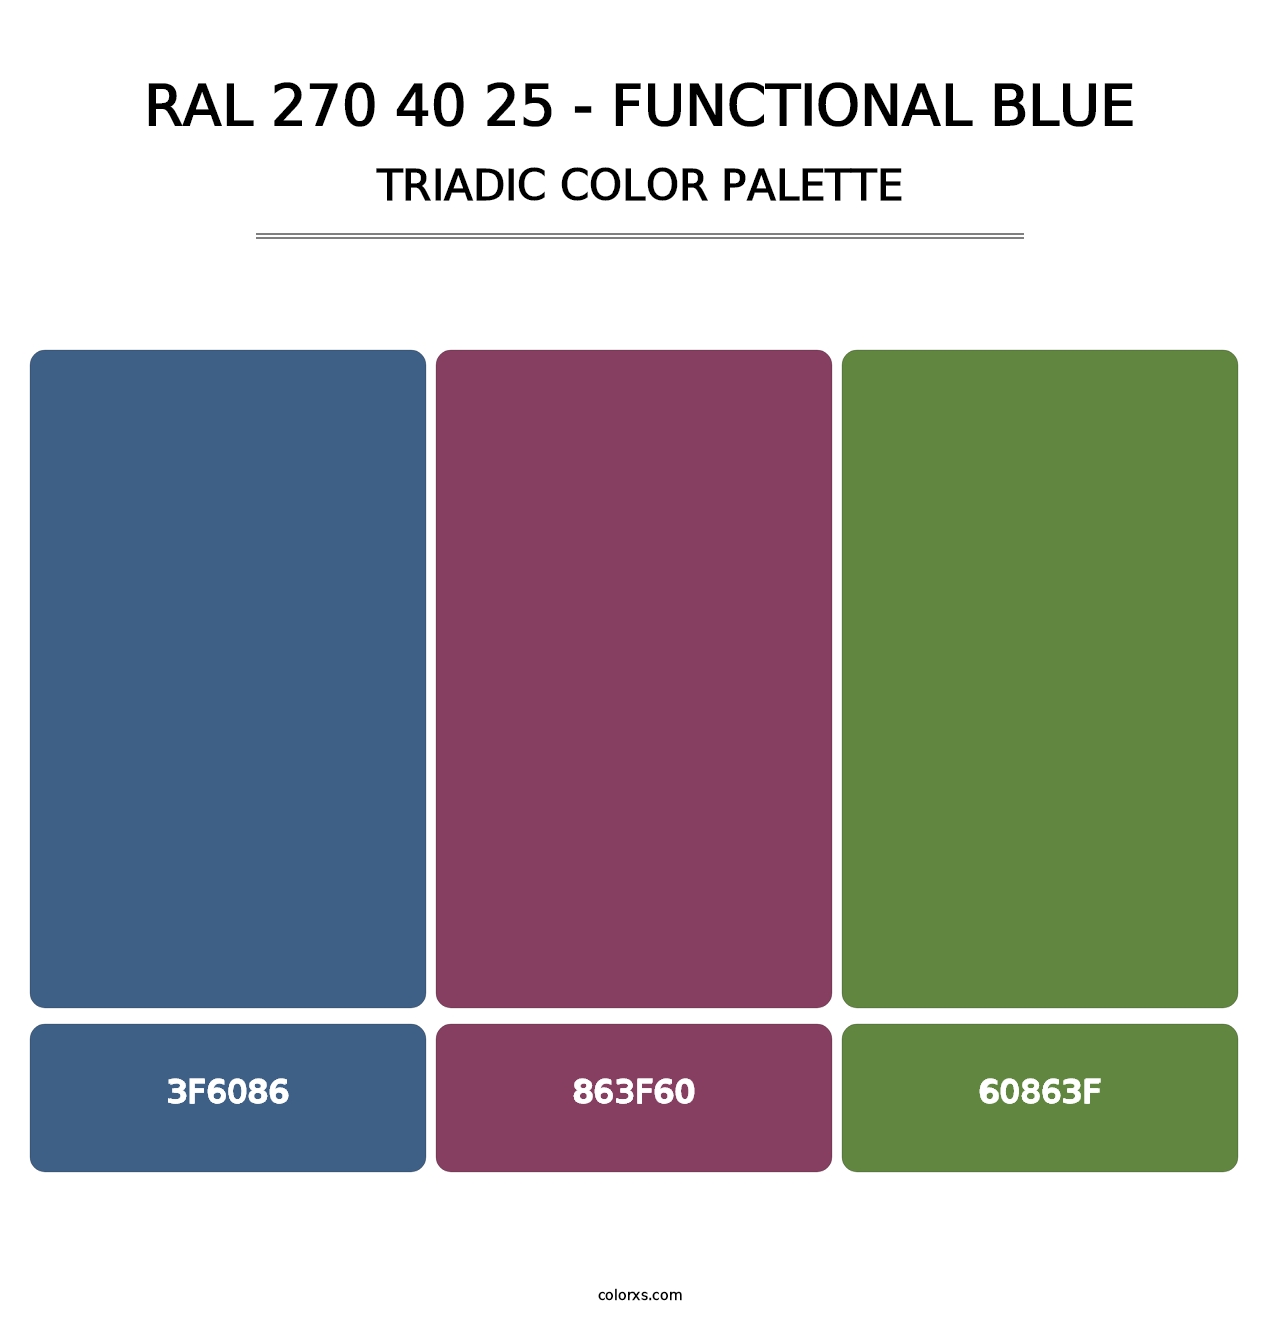 RAL 270 40 25 - Functional Blue - Triadic Color Palette